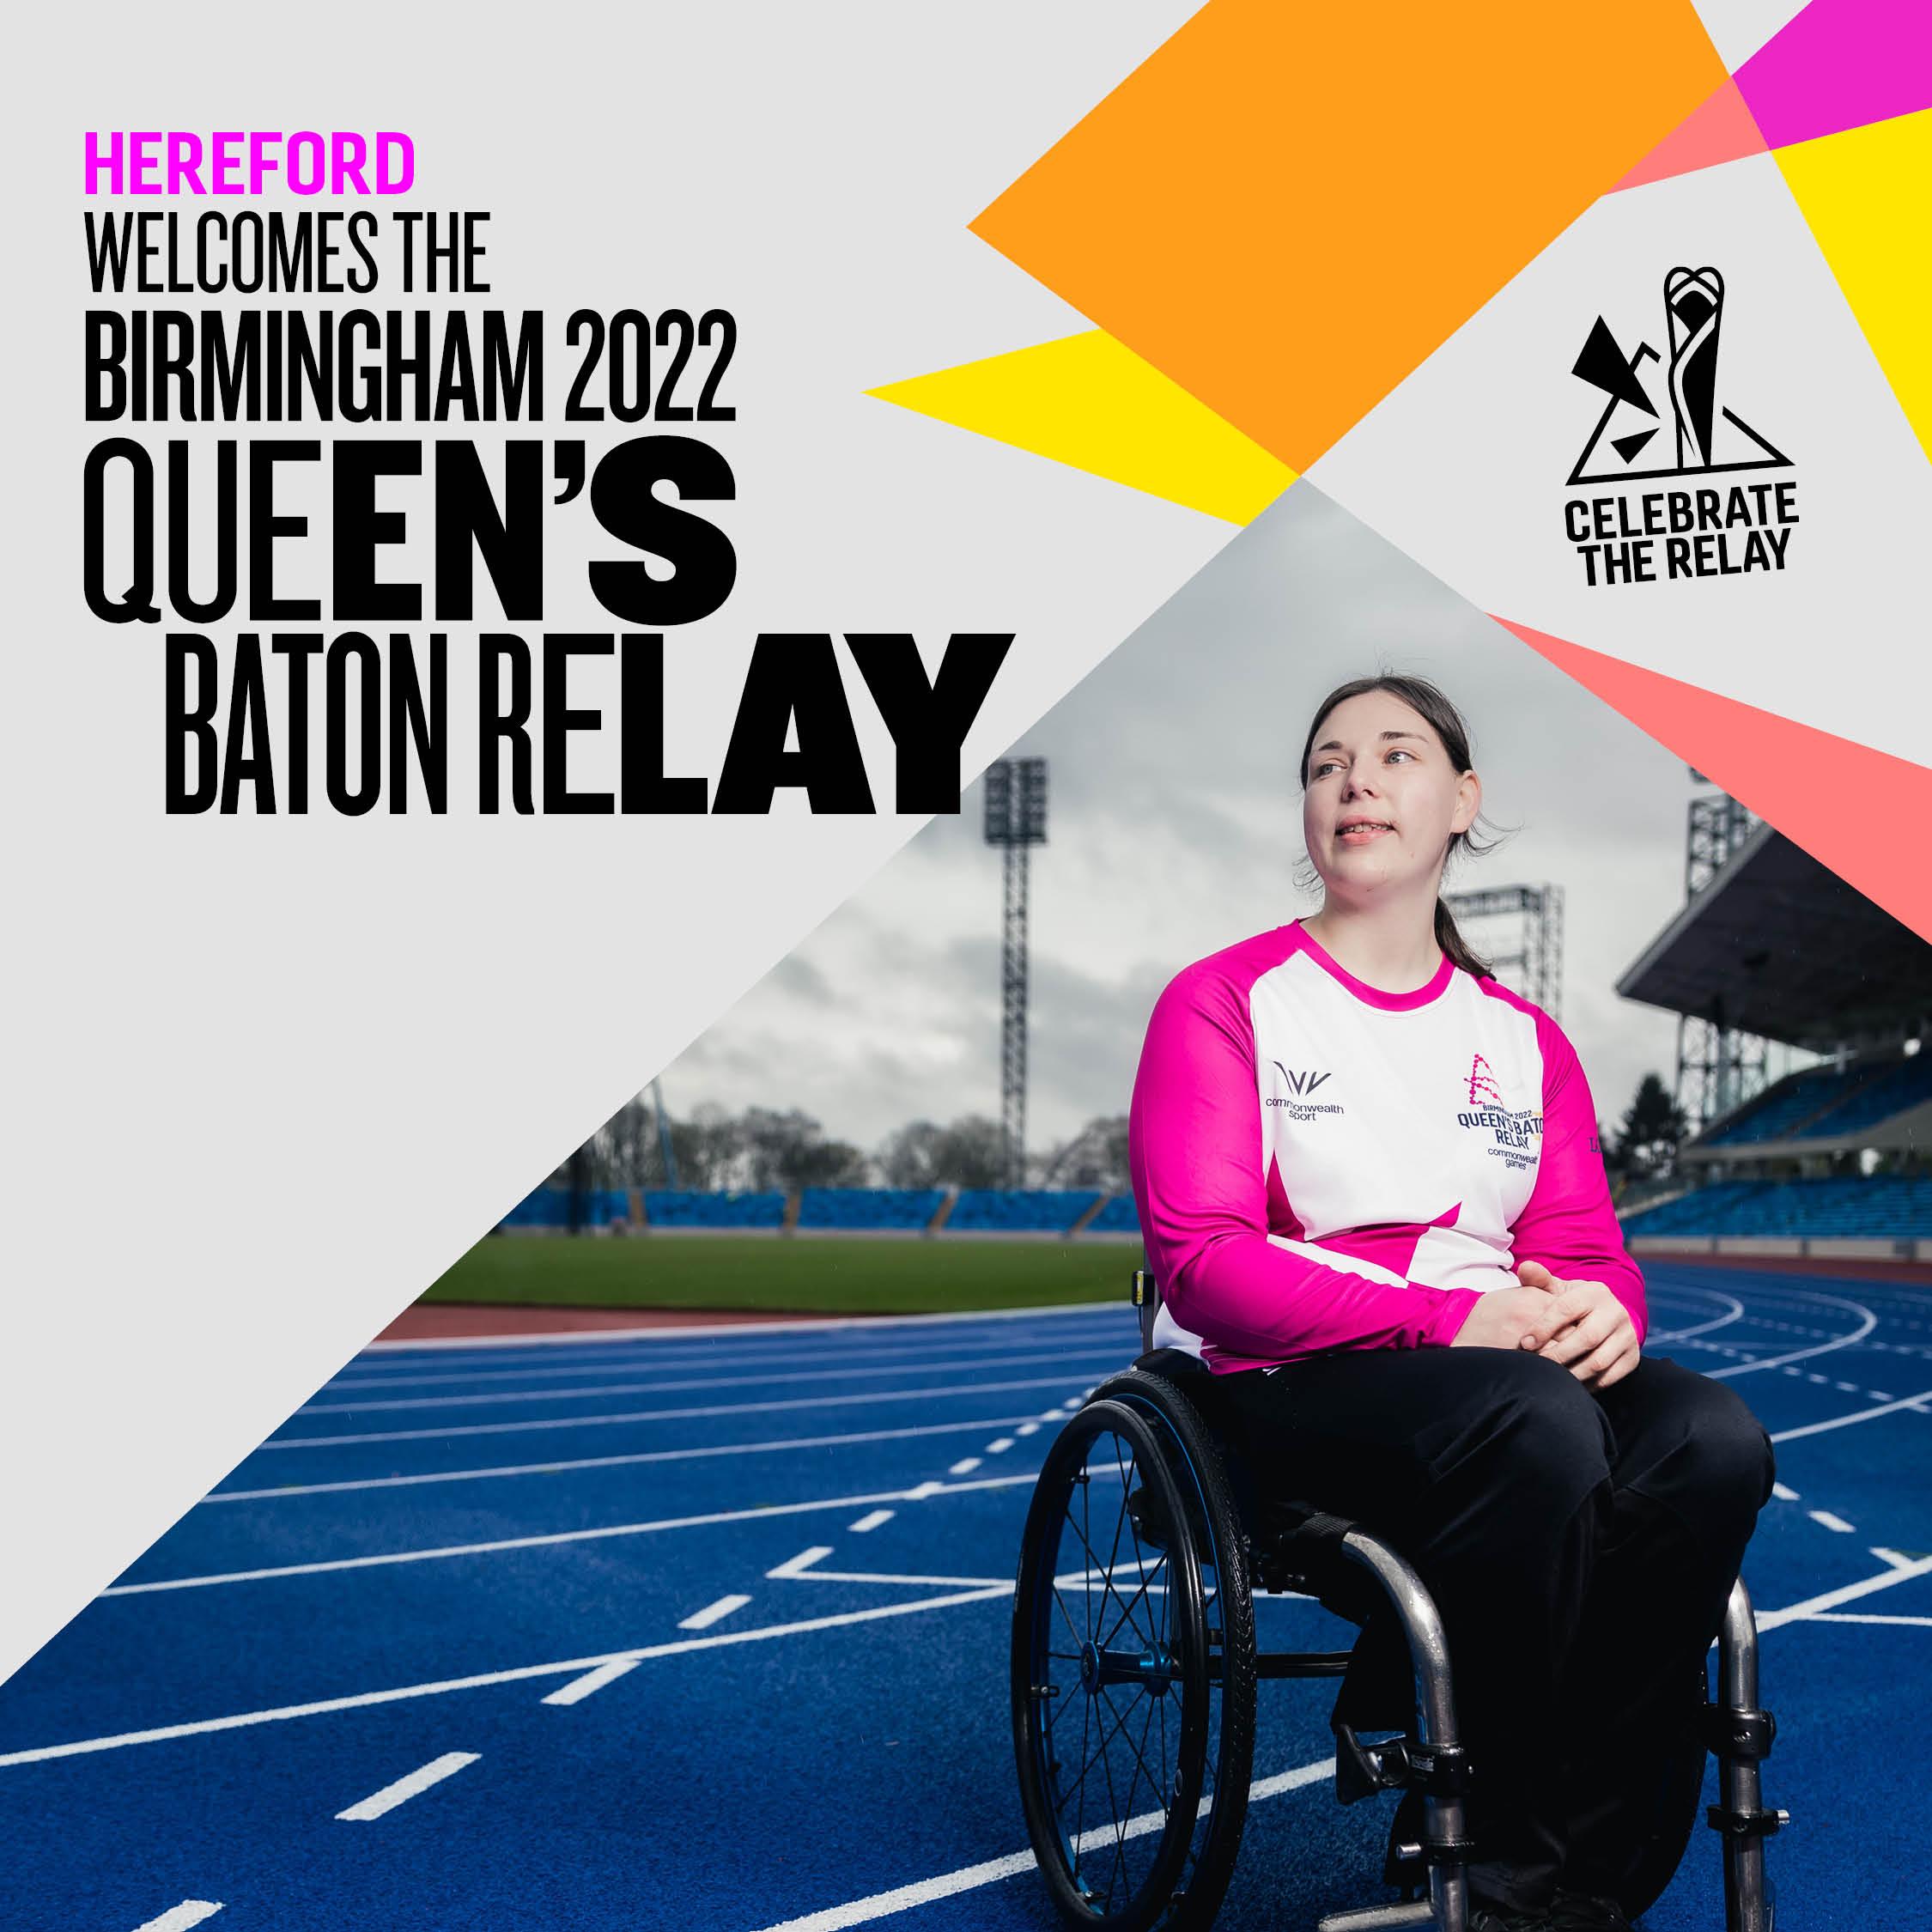 The Birmingham 2022 Queen’s Baton Relay will visit Hereford on Tuesday 5 July during its final journey through England this summer.

